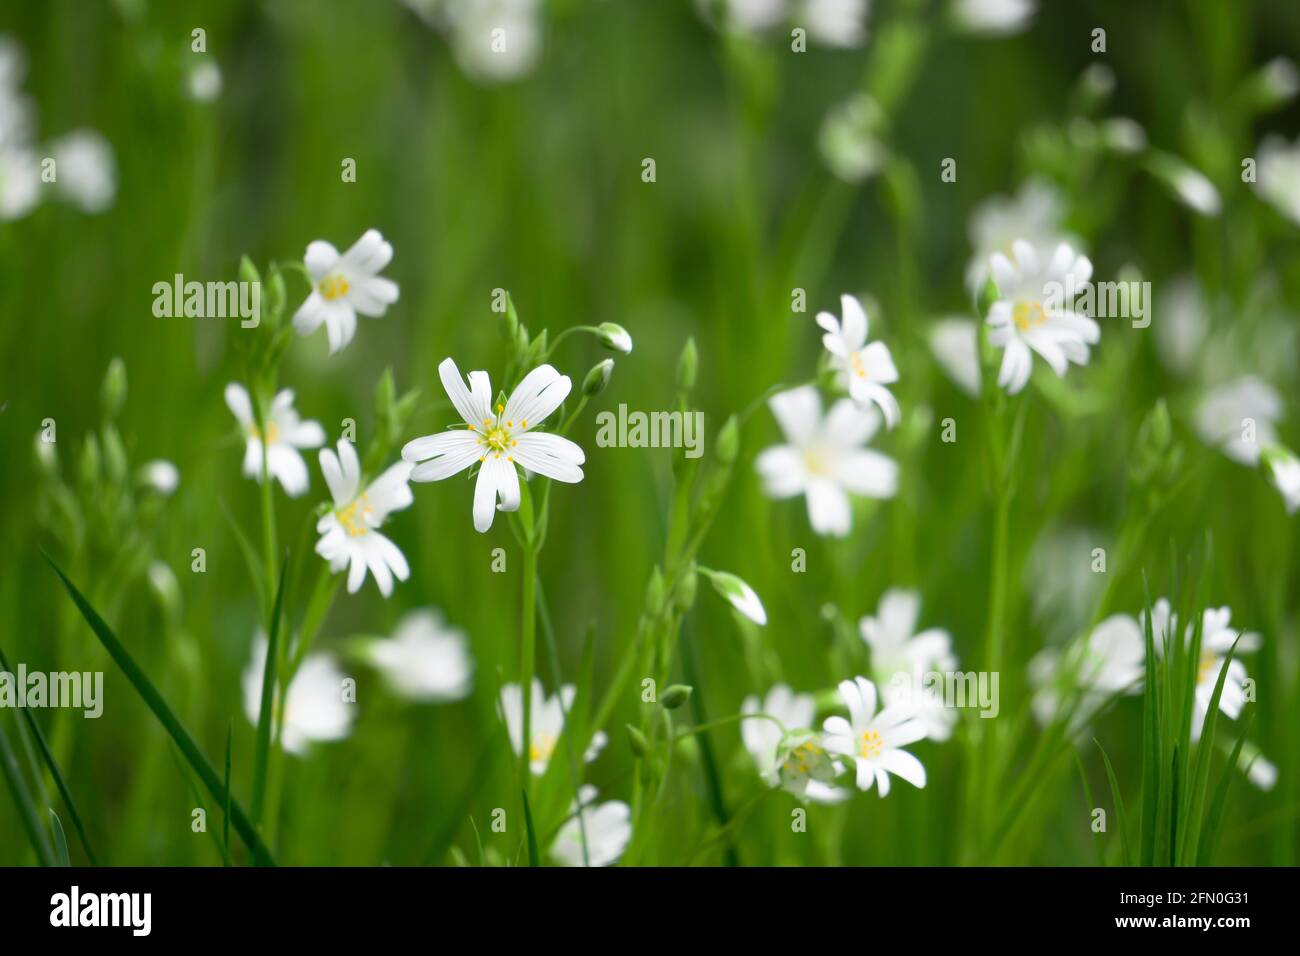 many white stellaria holostea flowers on the green grassy meadow Stock Photo